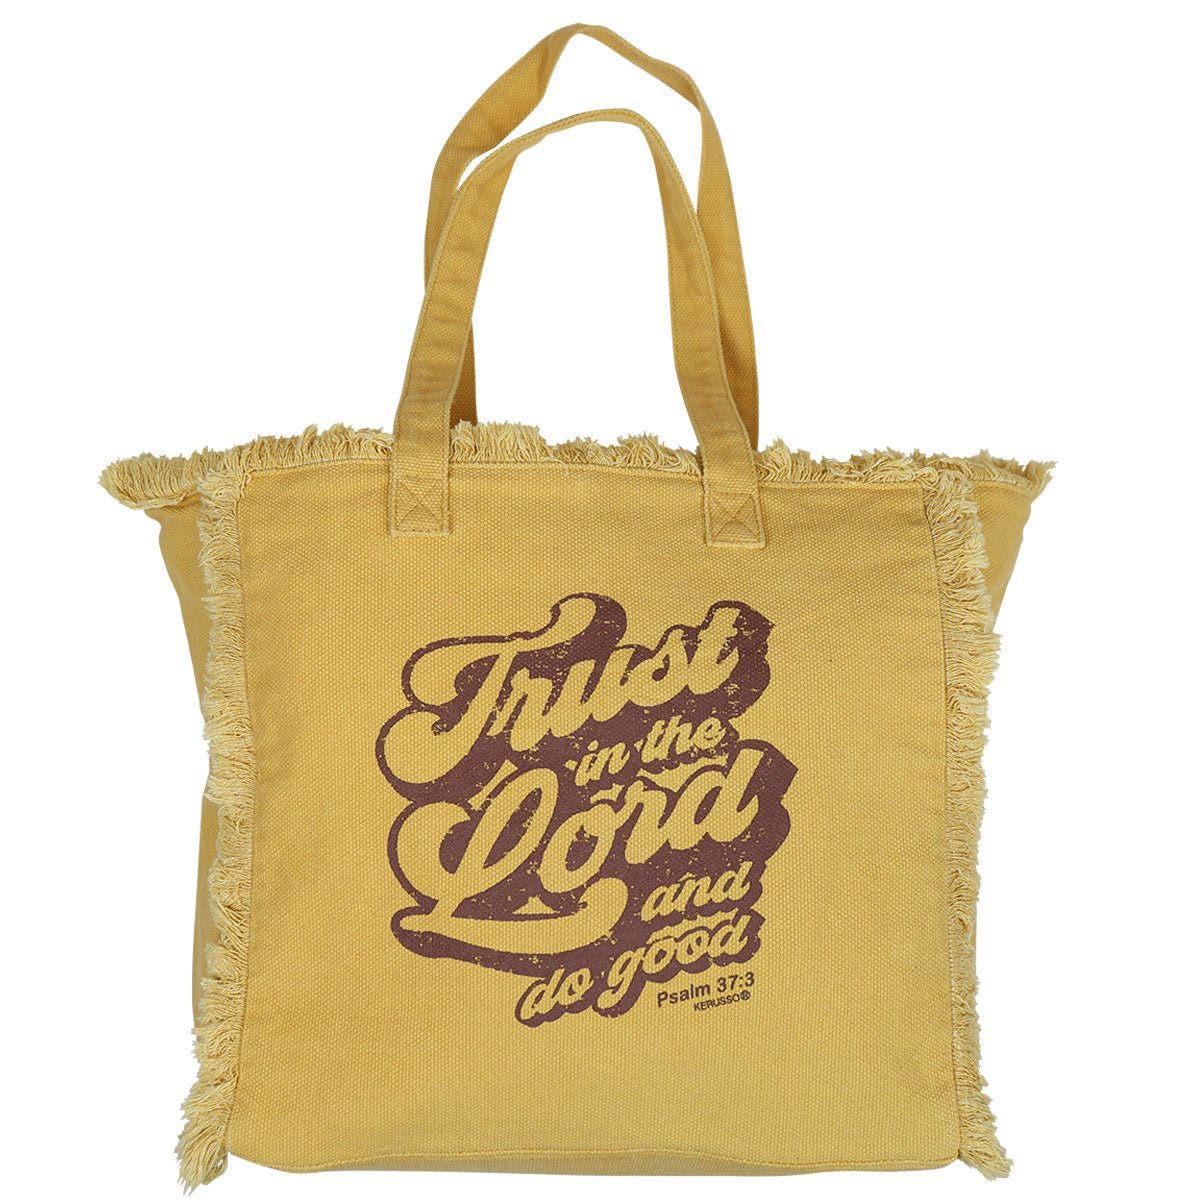 grace & truth Tote Bag Trust In The Lord | 2FruitBearers